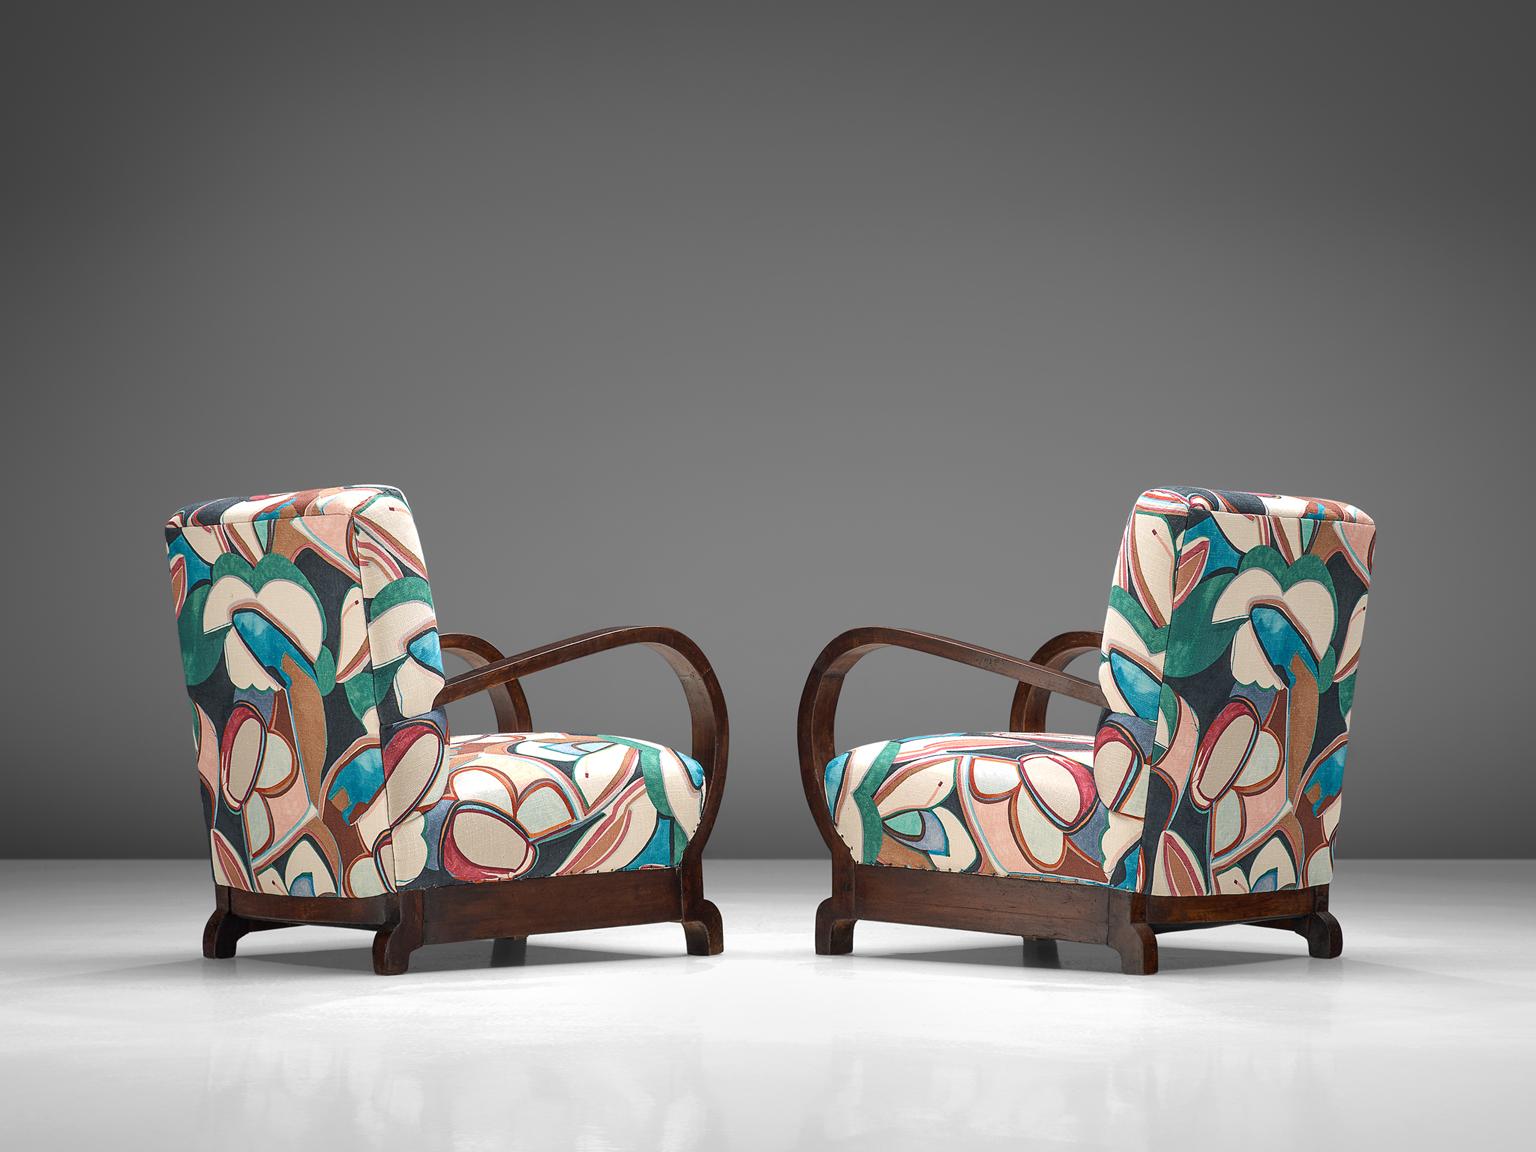 Lacquered Pair of Art Deco Chairs Reupholstered with a Floral Dedar Fabric